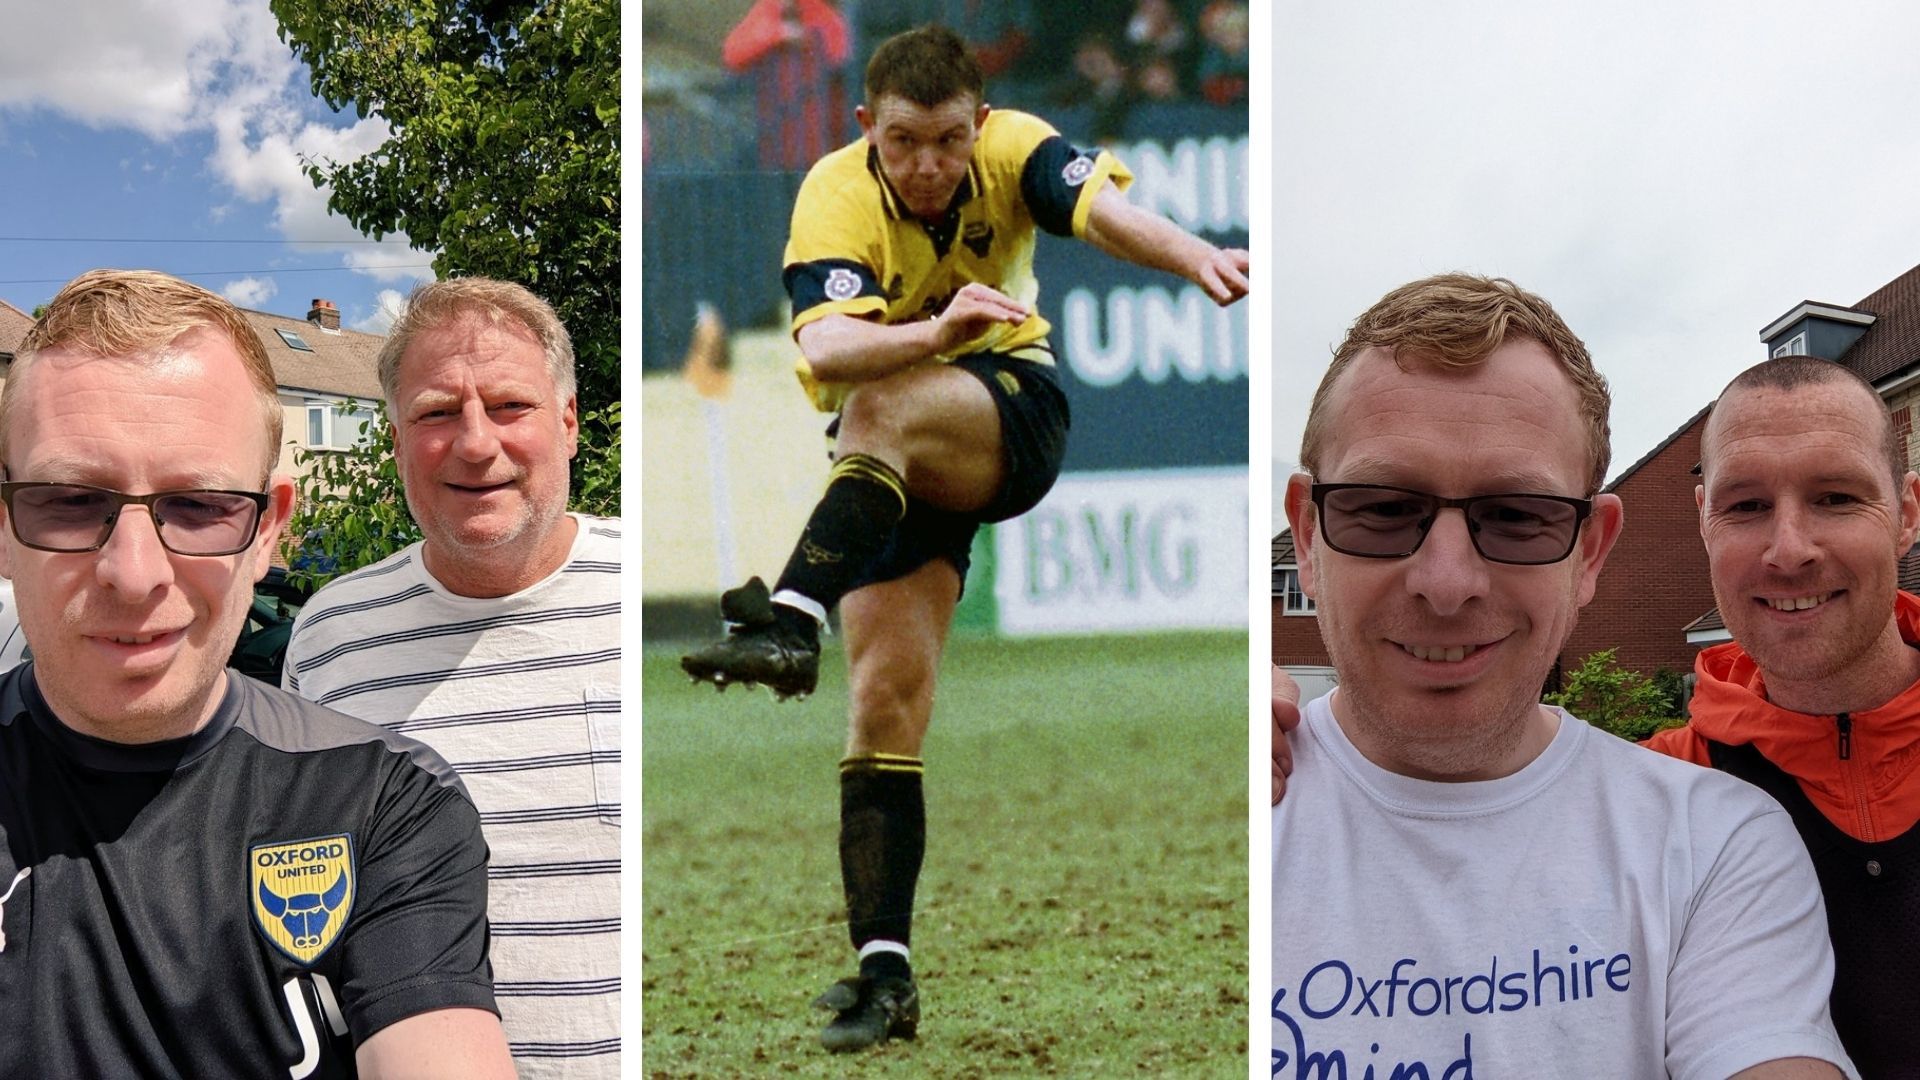 Oxford United legends join fan on challenge for Joey Beauchamp and Mind charity